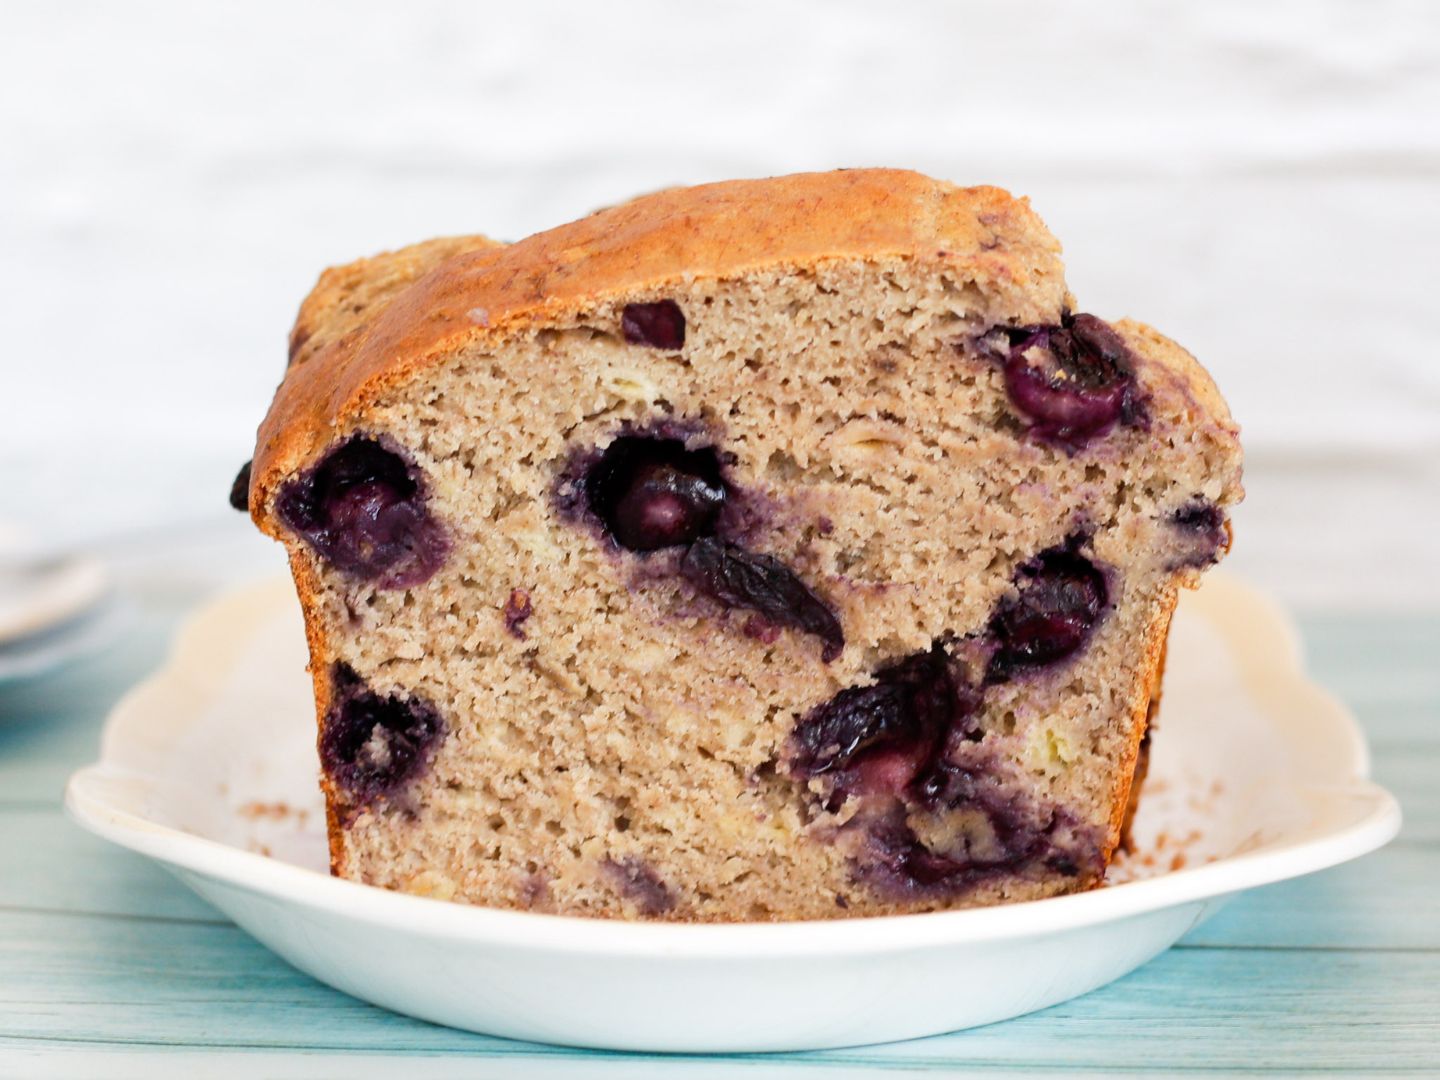 Shows the Vegan Blueberry Banana Bread cut, from the front